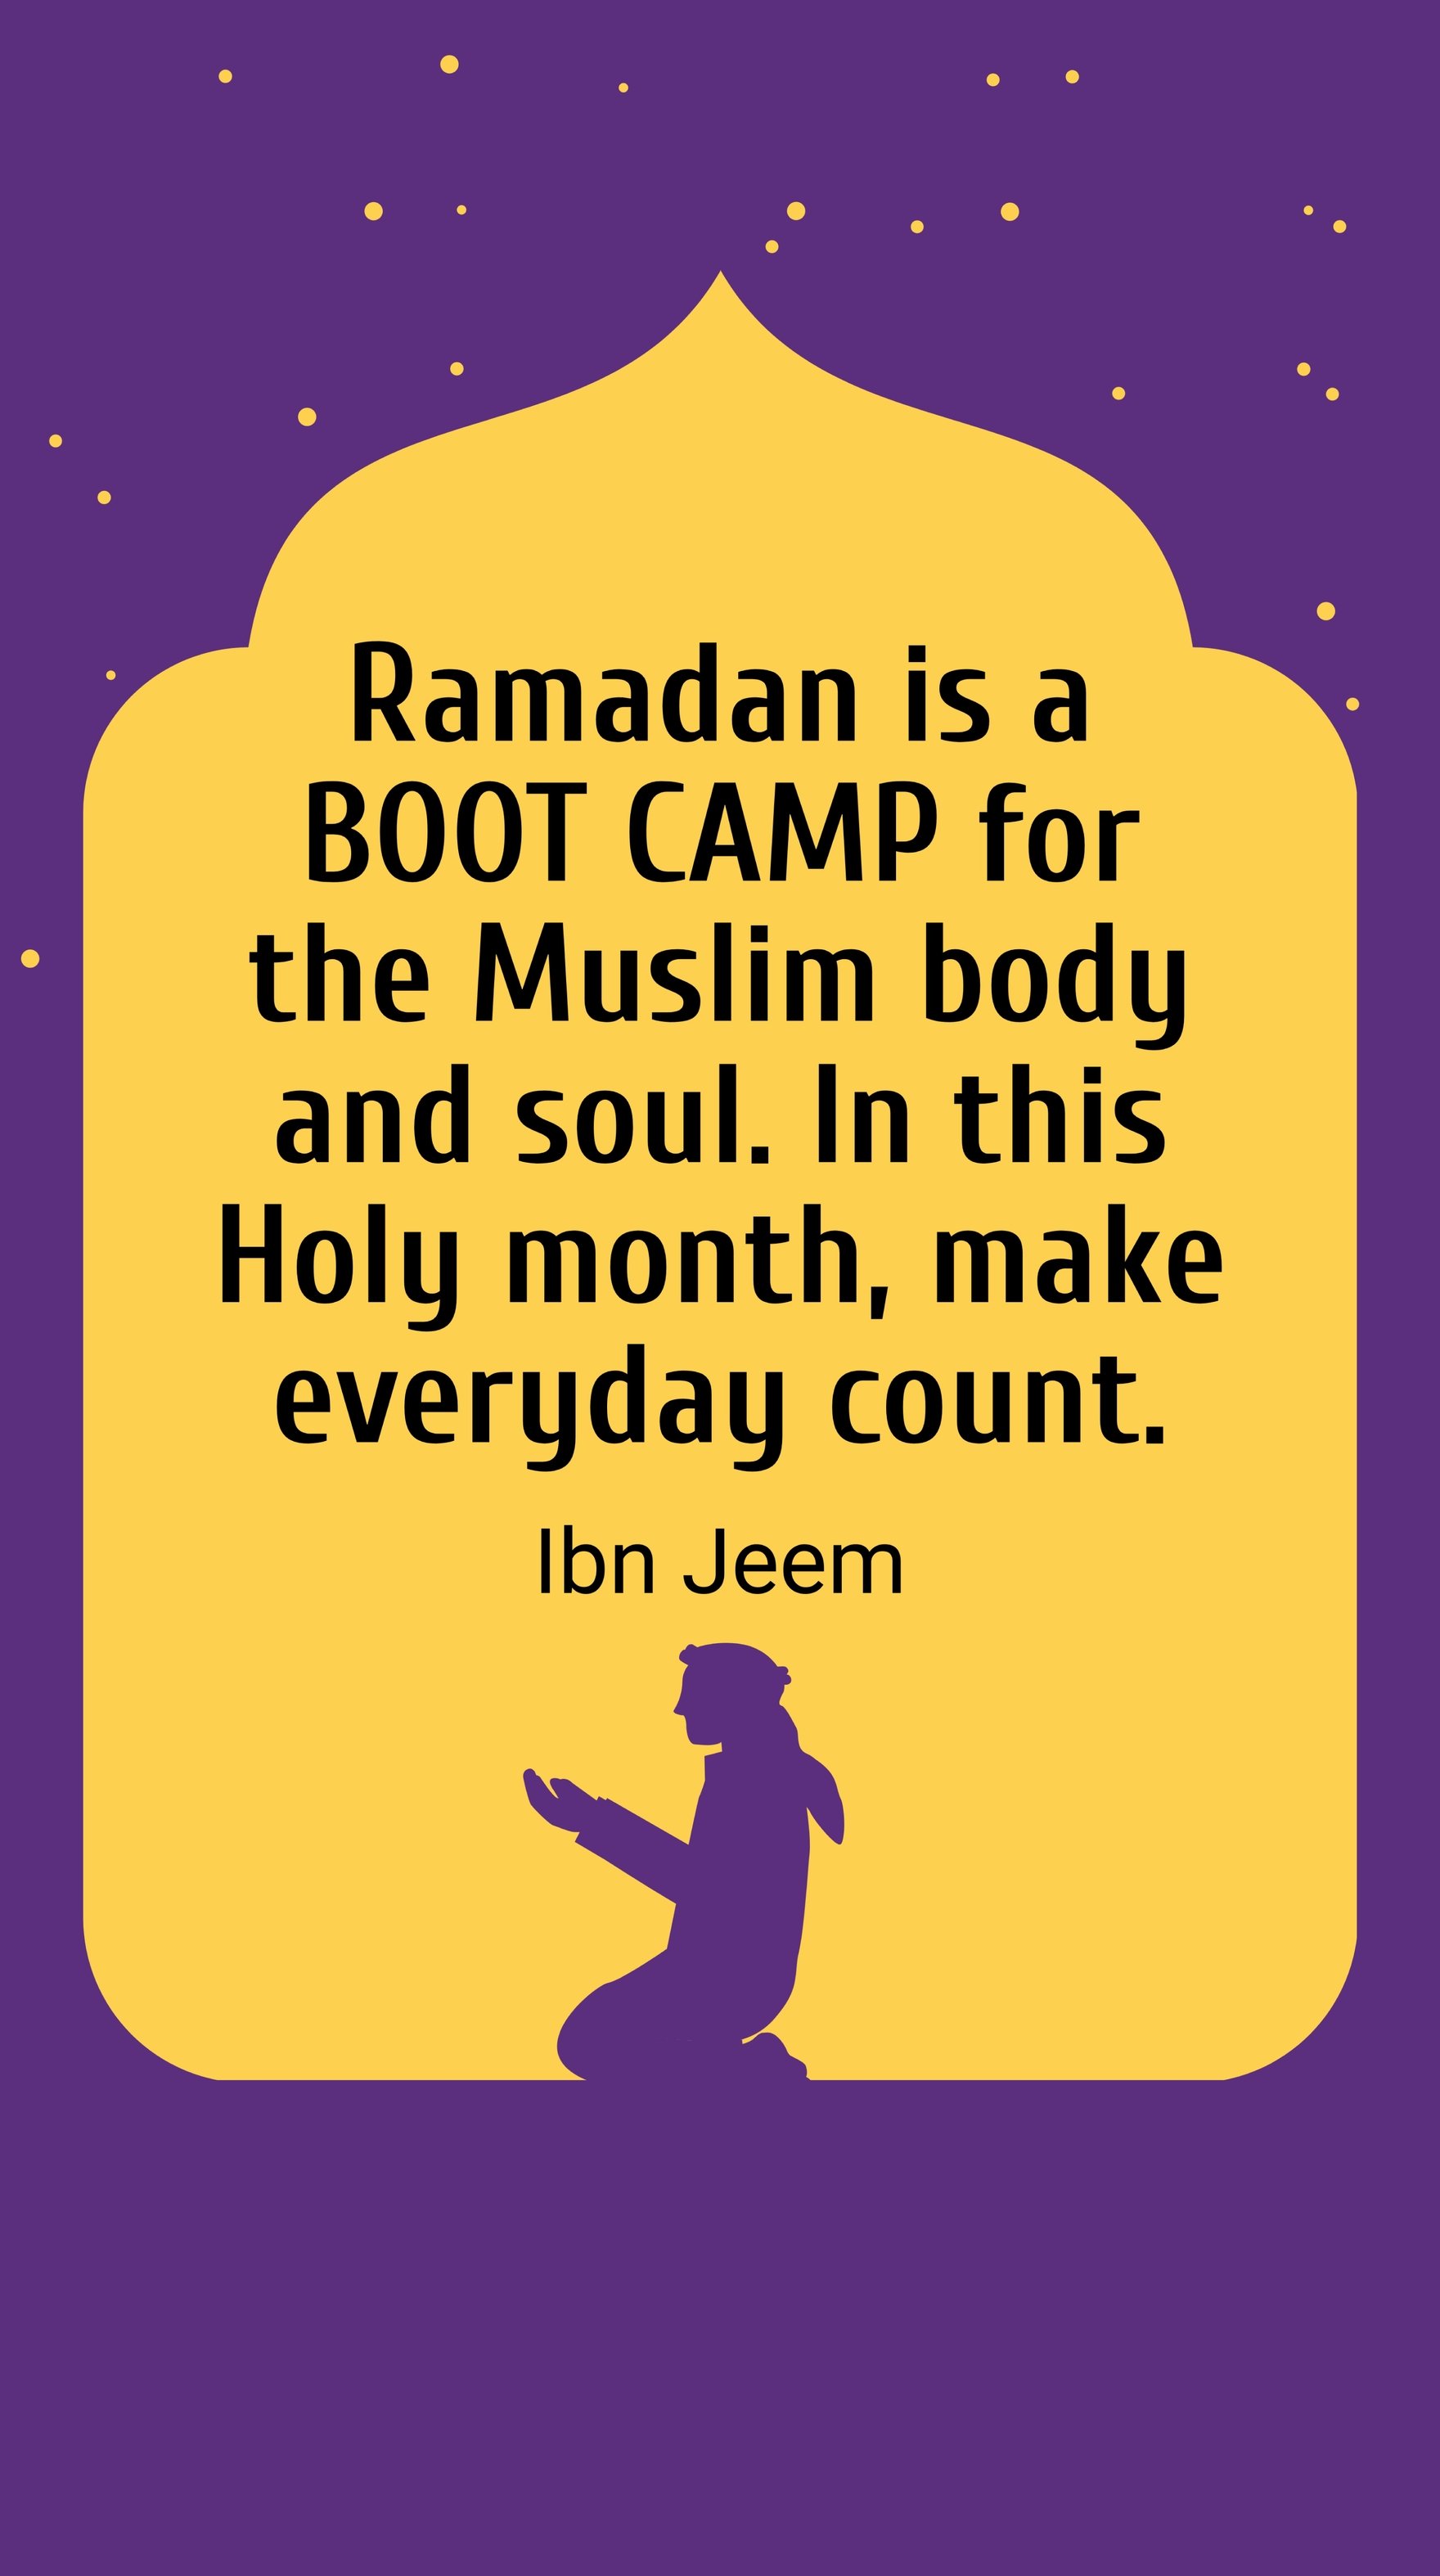 Free Ibn Jeem - Ramadan is a BOOT CAMP for the Muslim body and soul. In this Holy month, make everyday count.